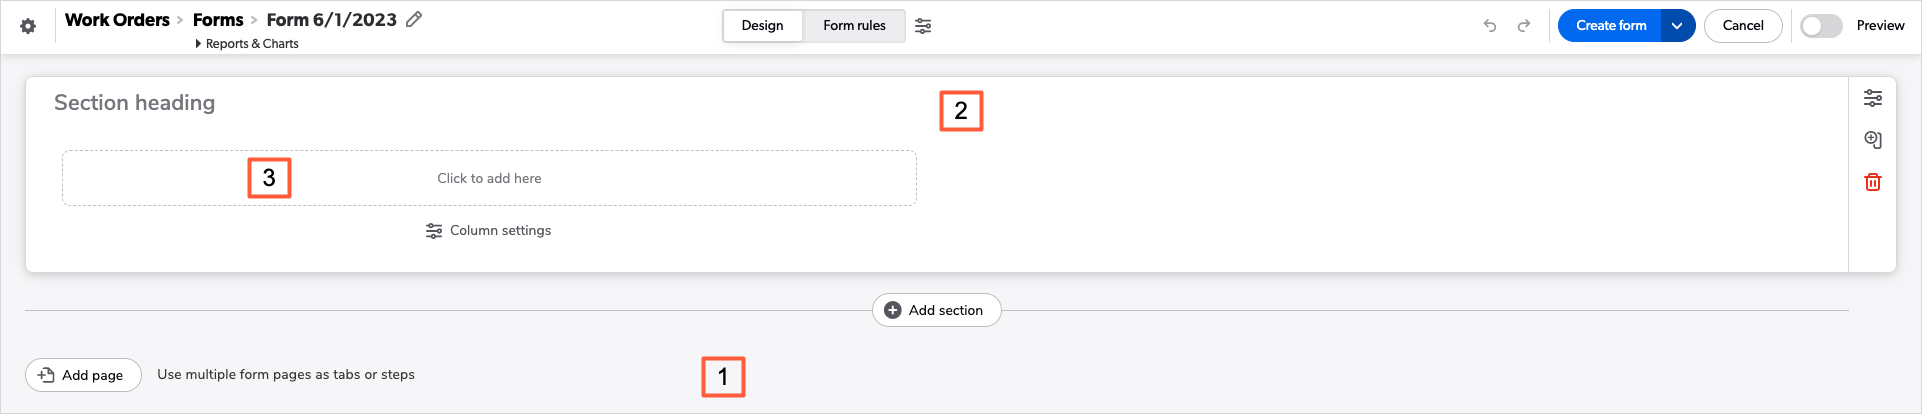 2023-06-07_Image_of_a_newly_created_form_in_the_form_builder_with_the_canvas__section__and_column_labeled.png